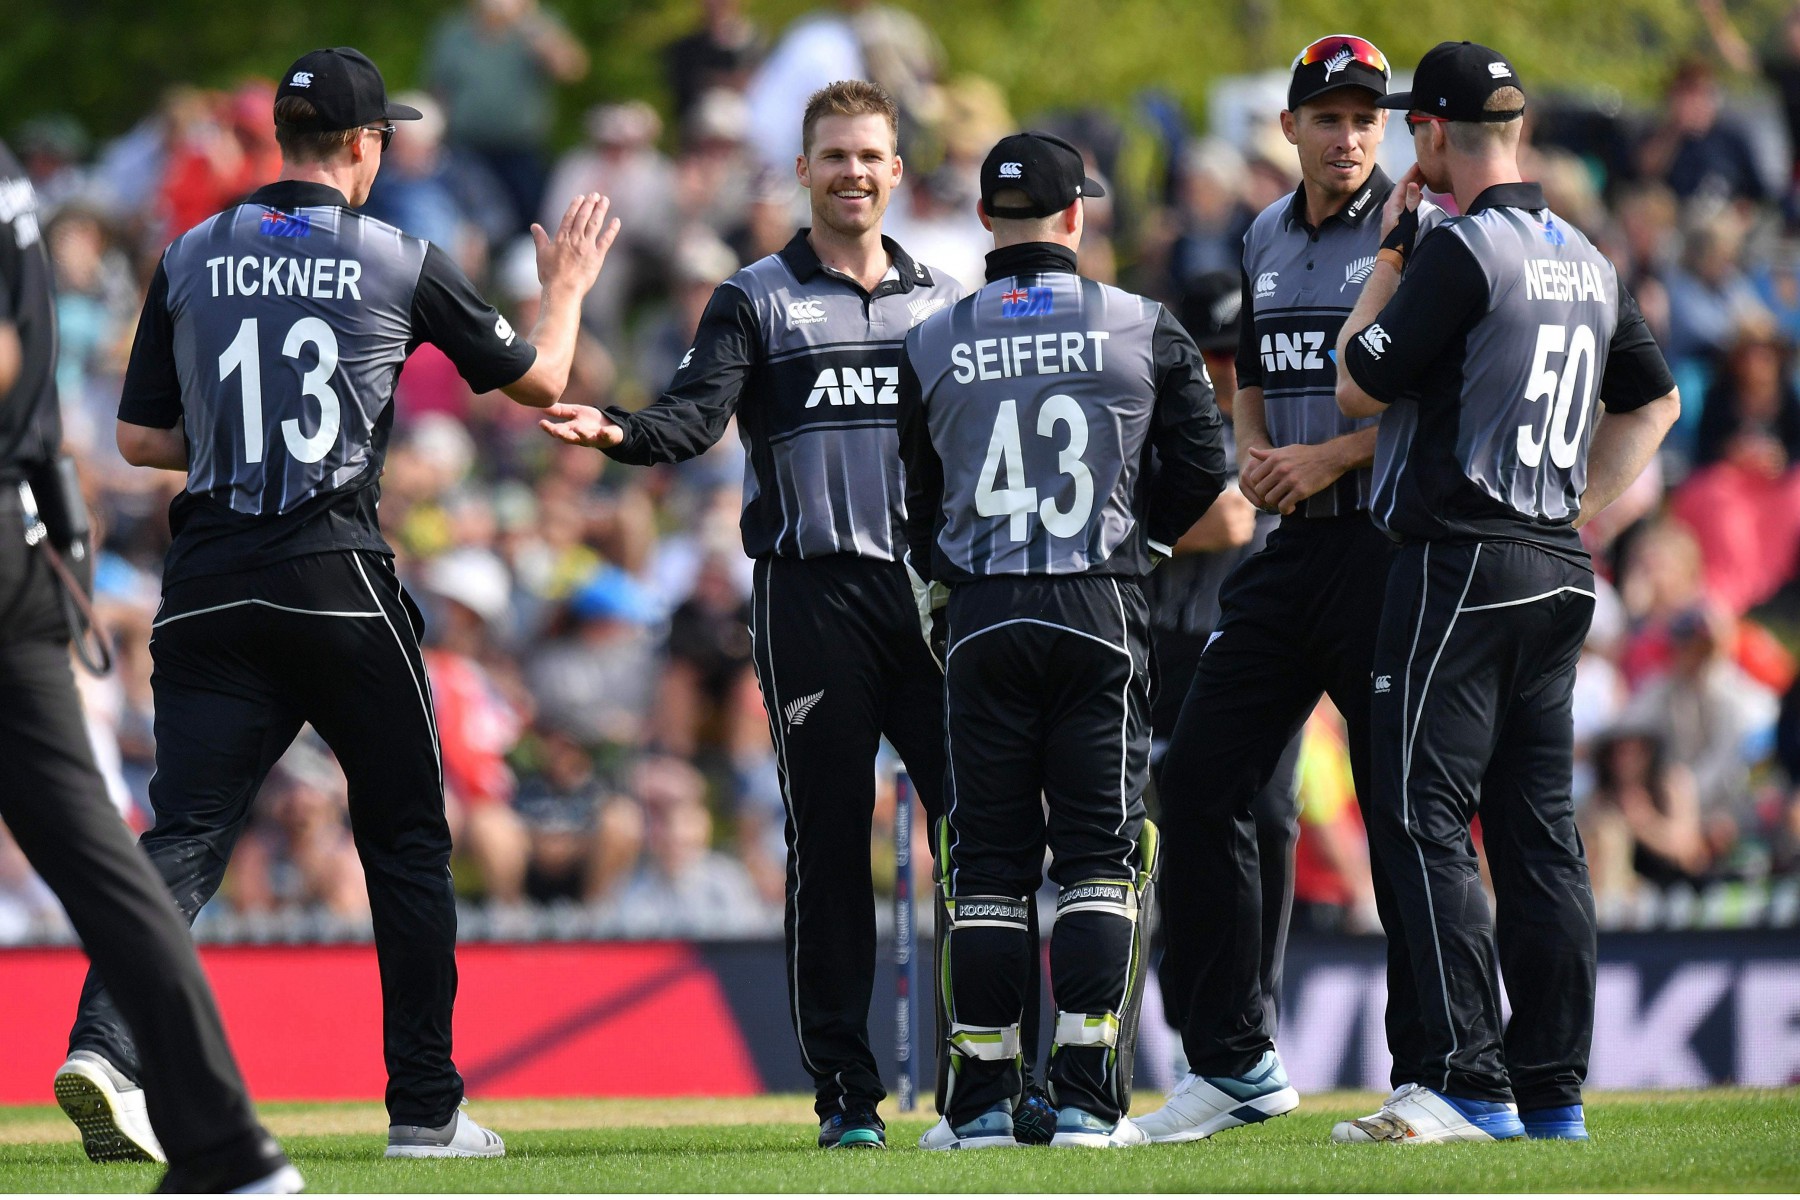 , England snatch defeat from the jaws of victory with another batting collapse sealing 14-run T20 defeat to New Zealand